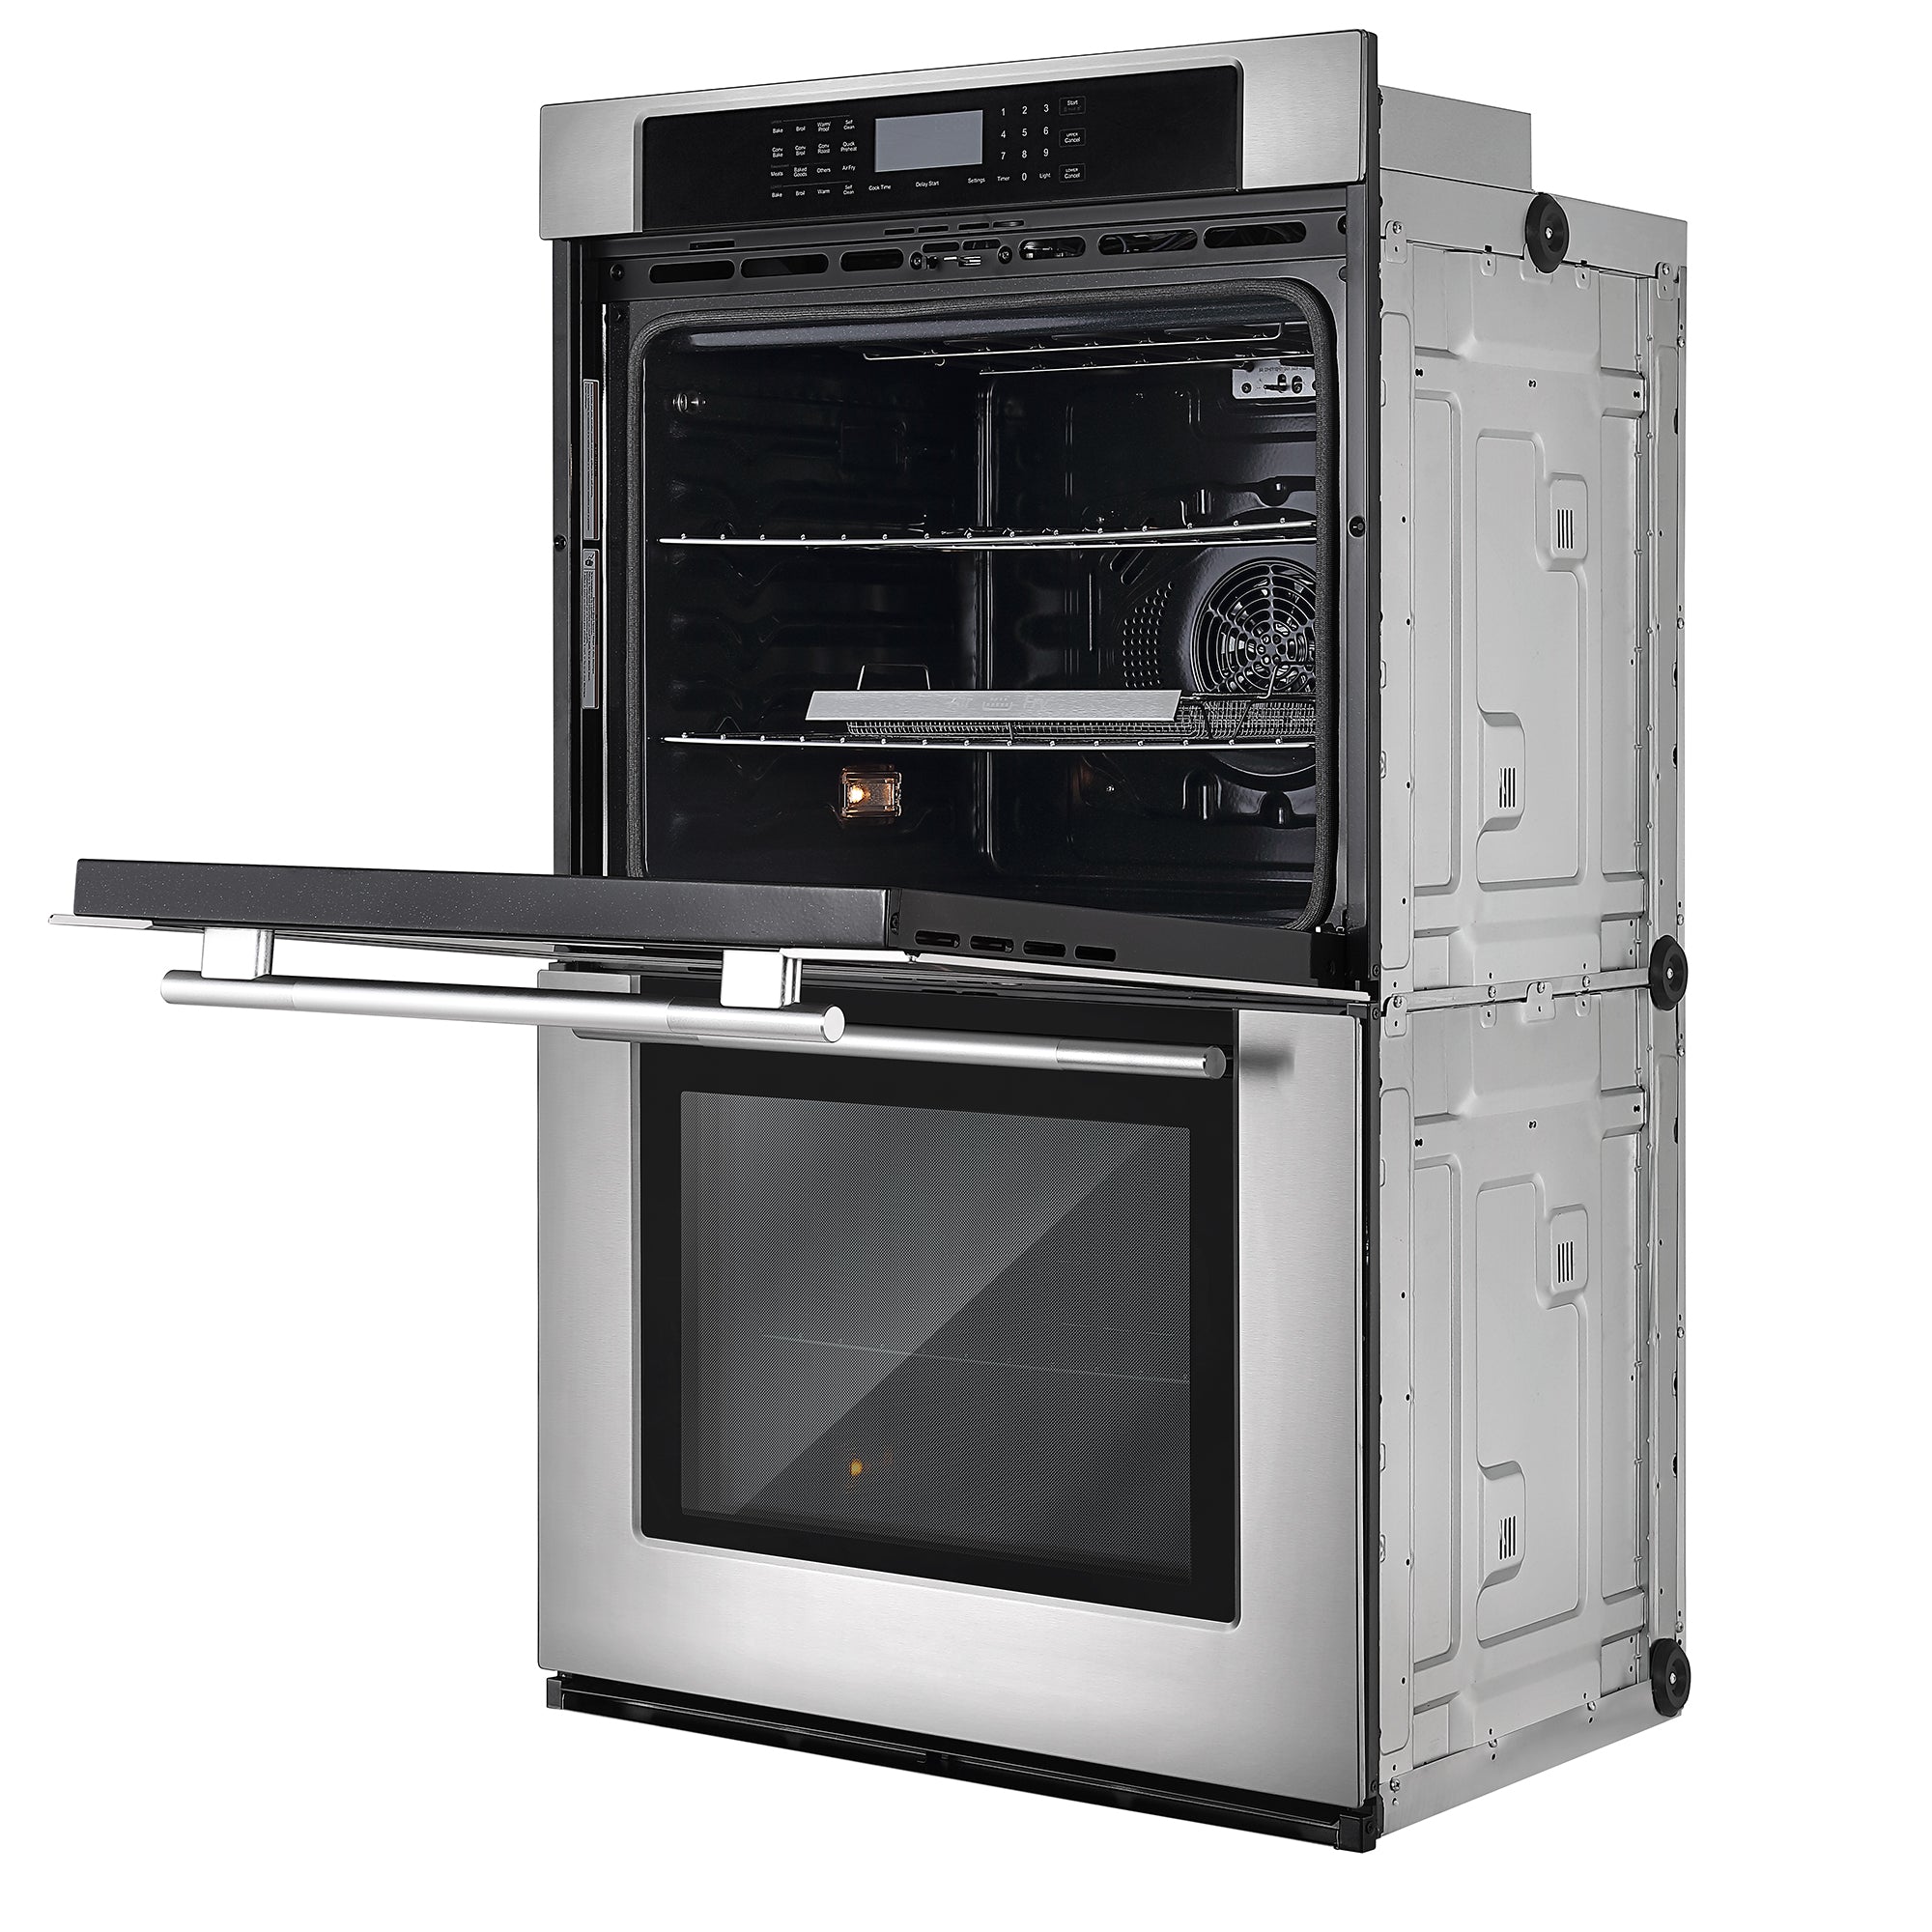 Empava 30" 30WO05 Electric Double Wall Oven